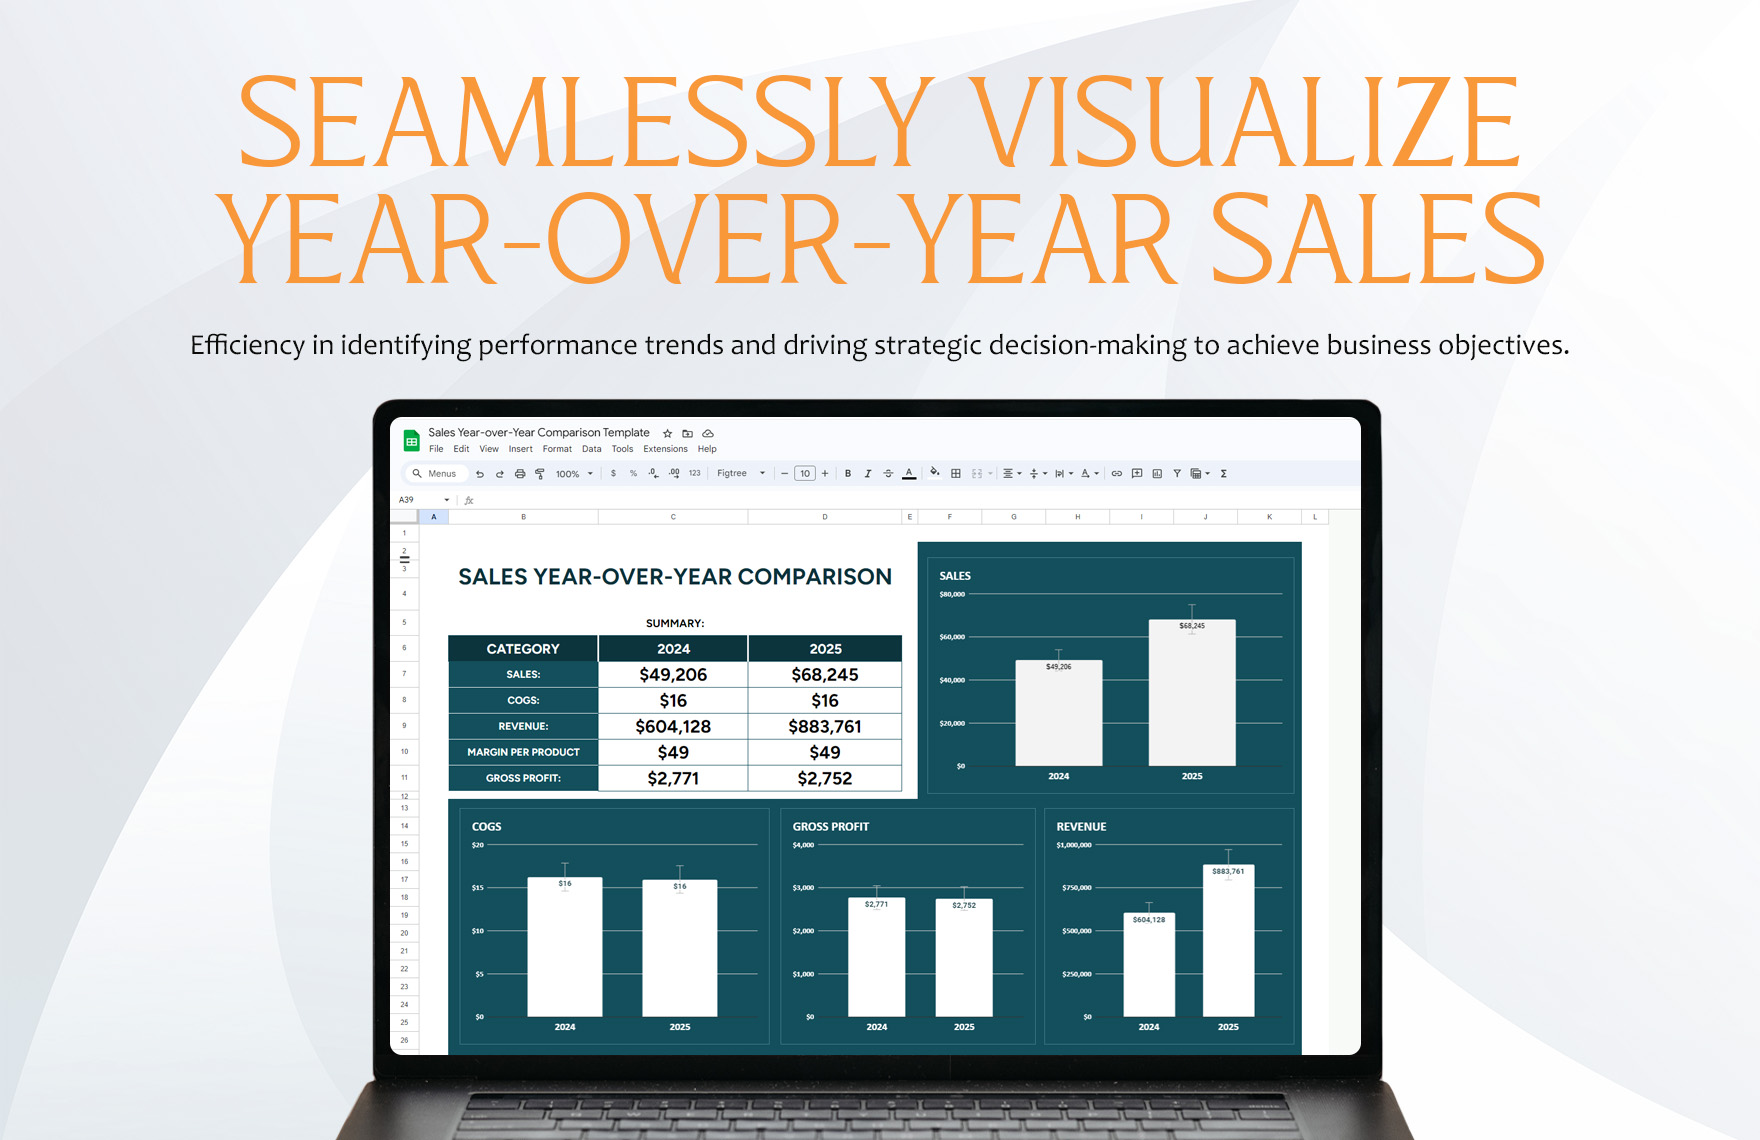 Sales Year-over-Year Comparison Template